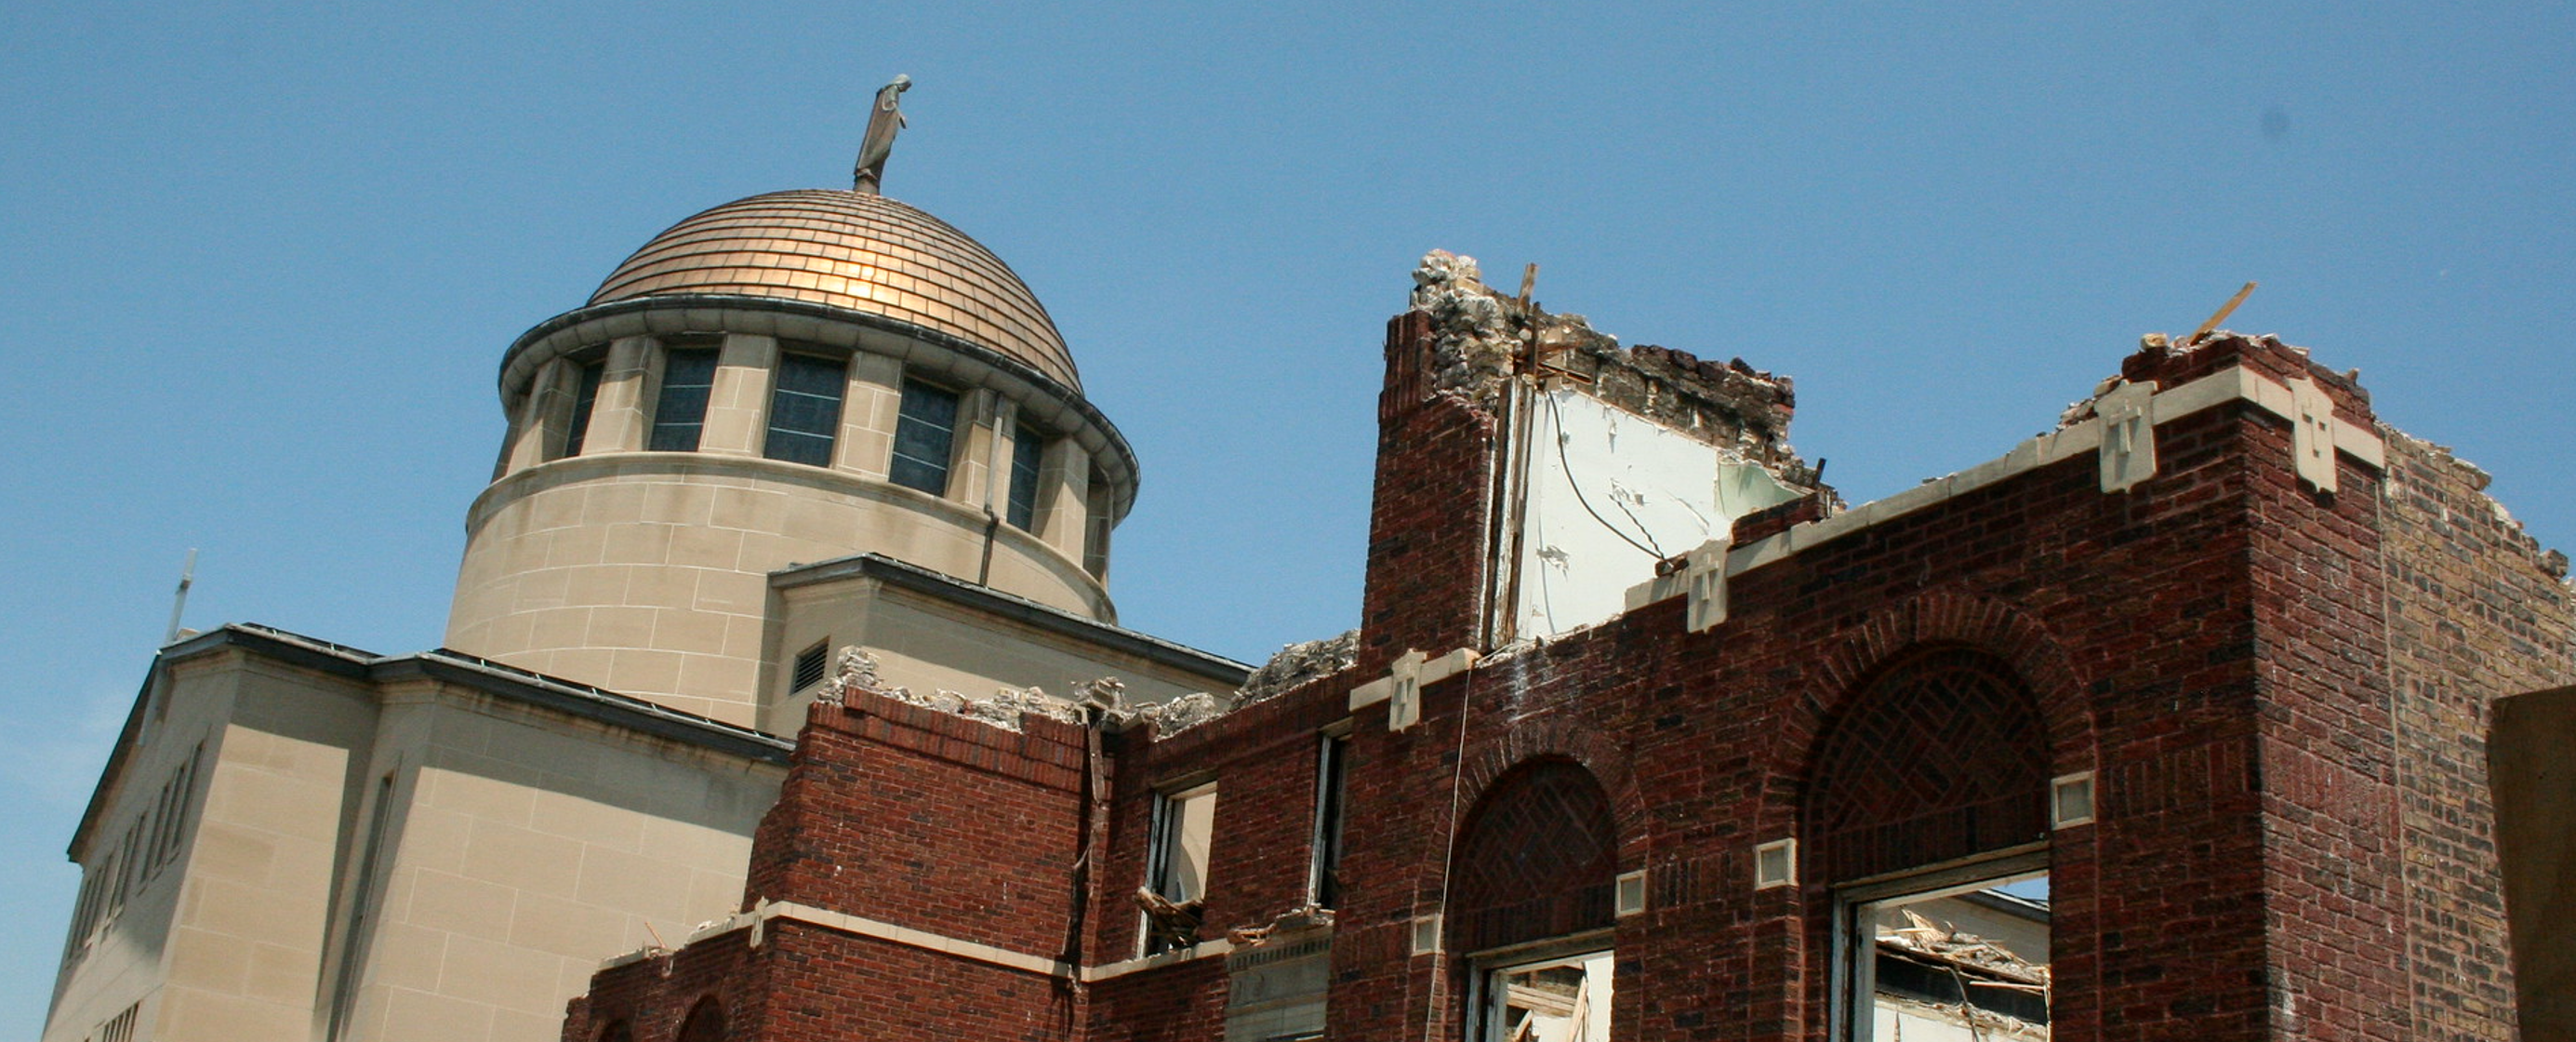 Snip of Demolition: Our Lady of Mercy Church Convent, 4419 North Kedzie, Chicago, IL